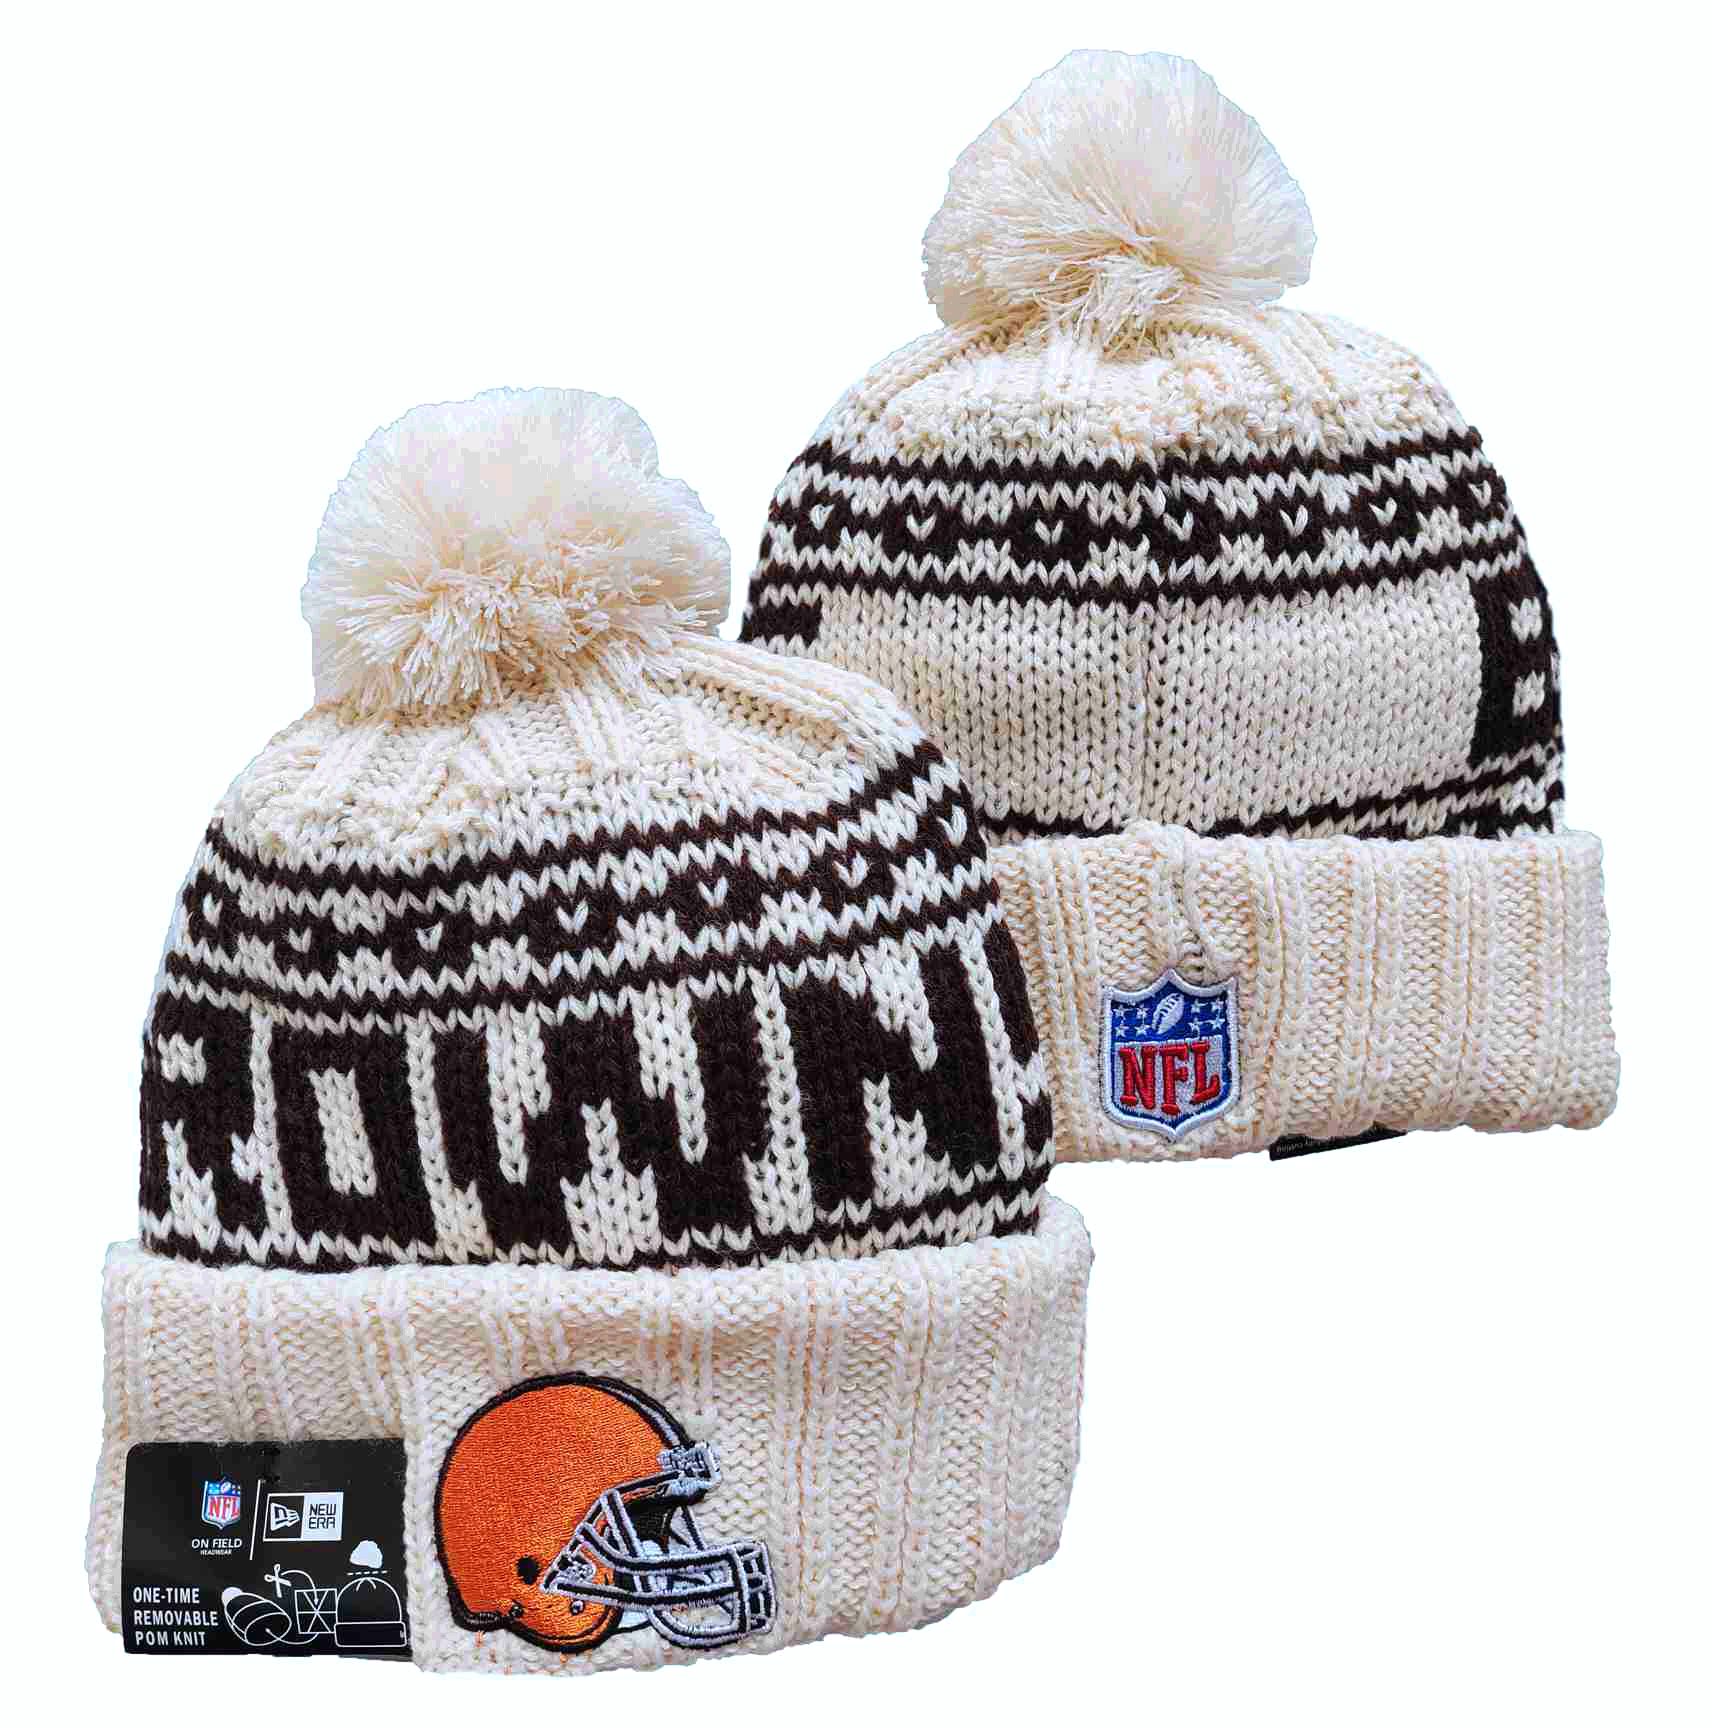 Cleveland Browns Knit Hats -2